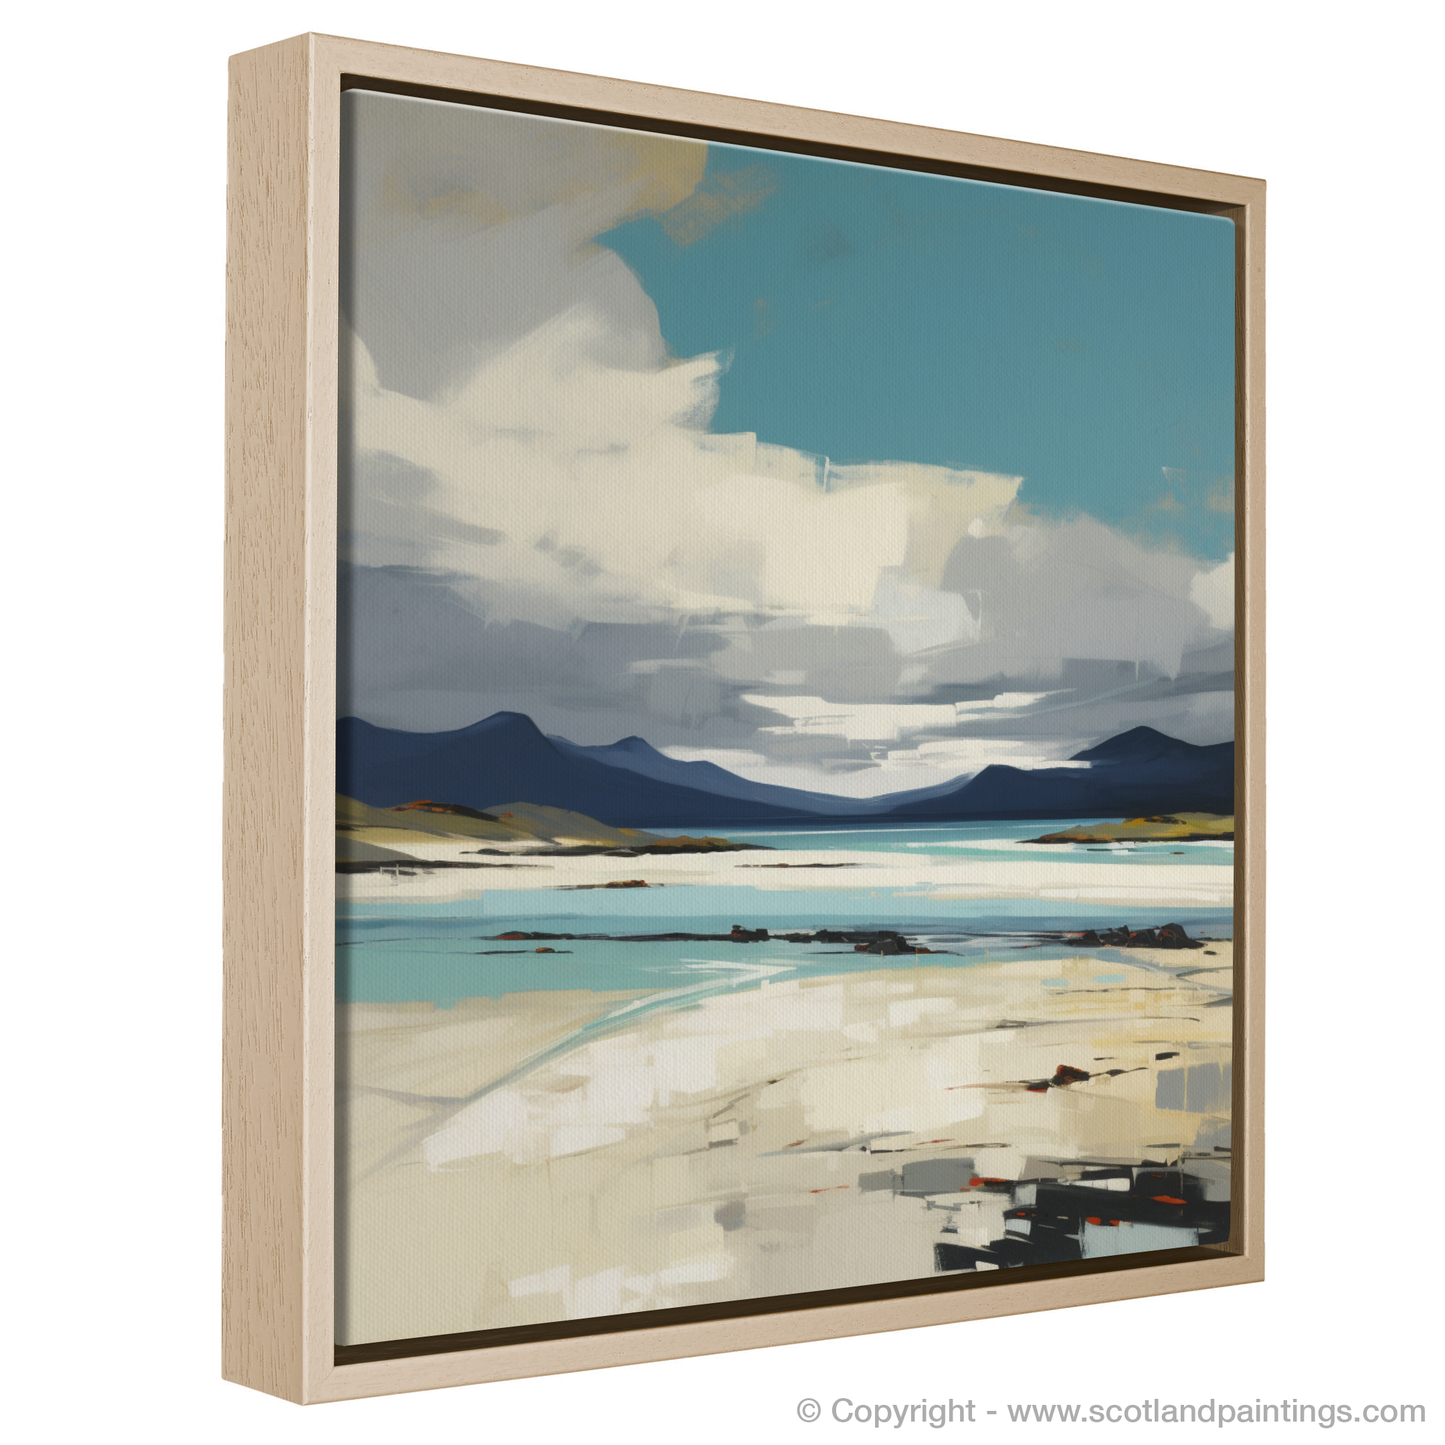 Painting and Art Print of Luskentyre Sands on the Isle of Harris entitled "Expressionist Luskentyre Sands: A Scottish Coastal Masterpiece".